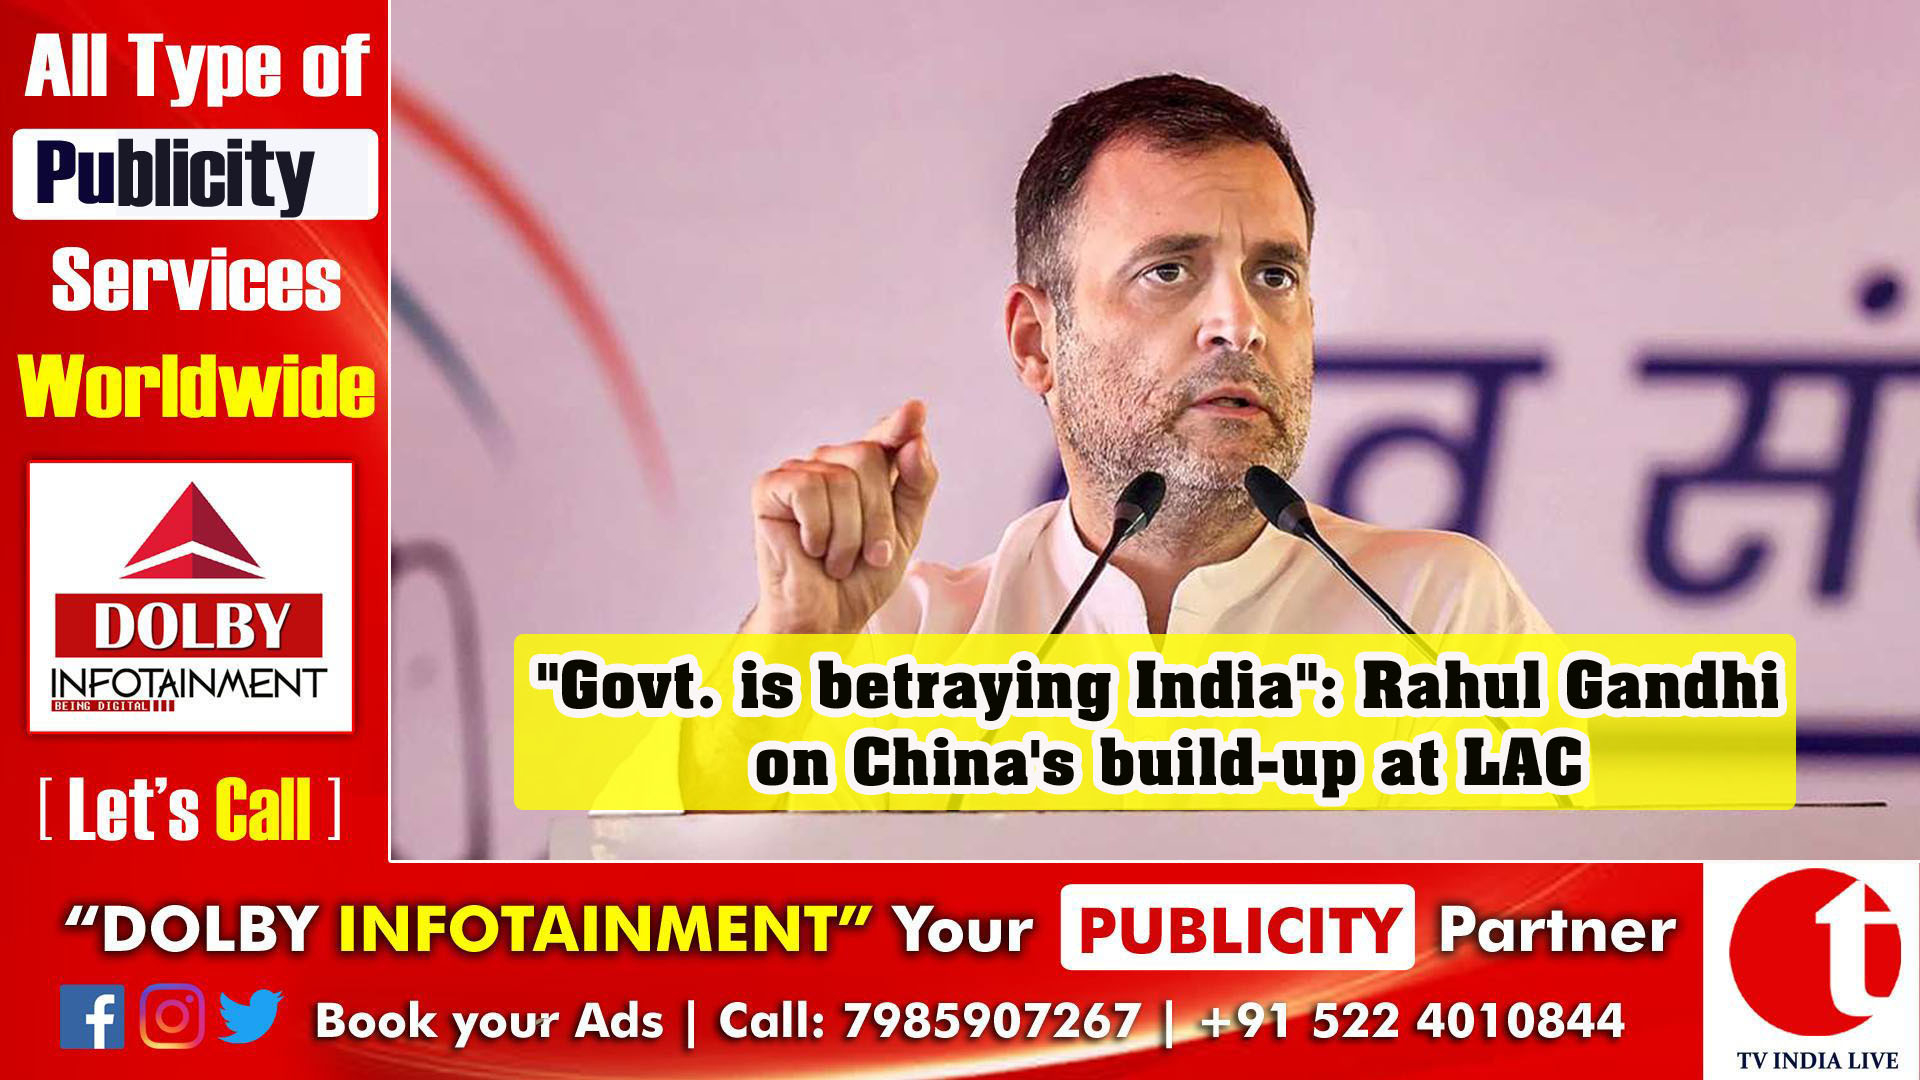 "Govt. is betraying India": Rahul Gandhi on China's build-up at LAC